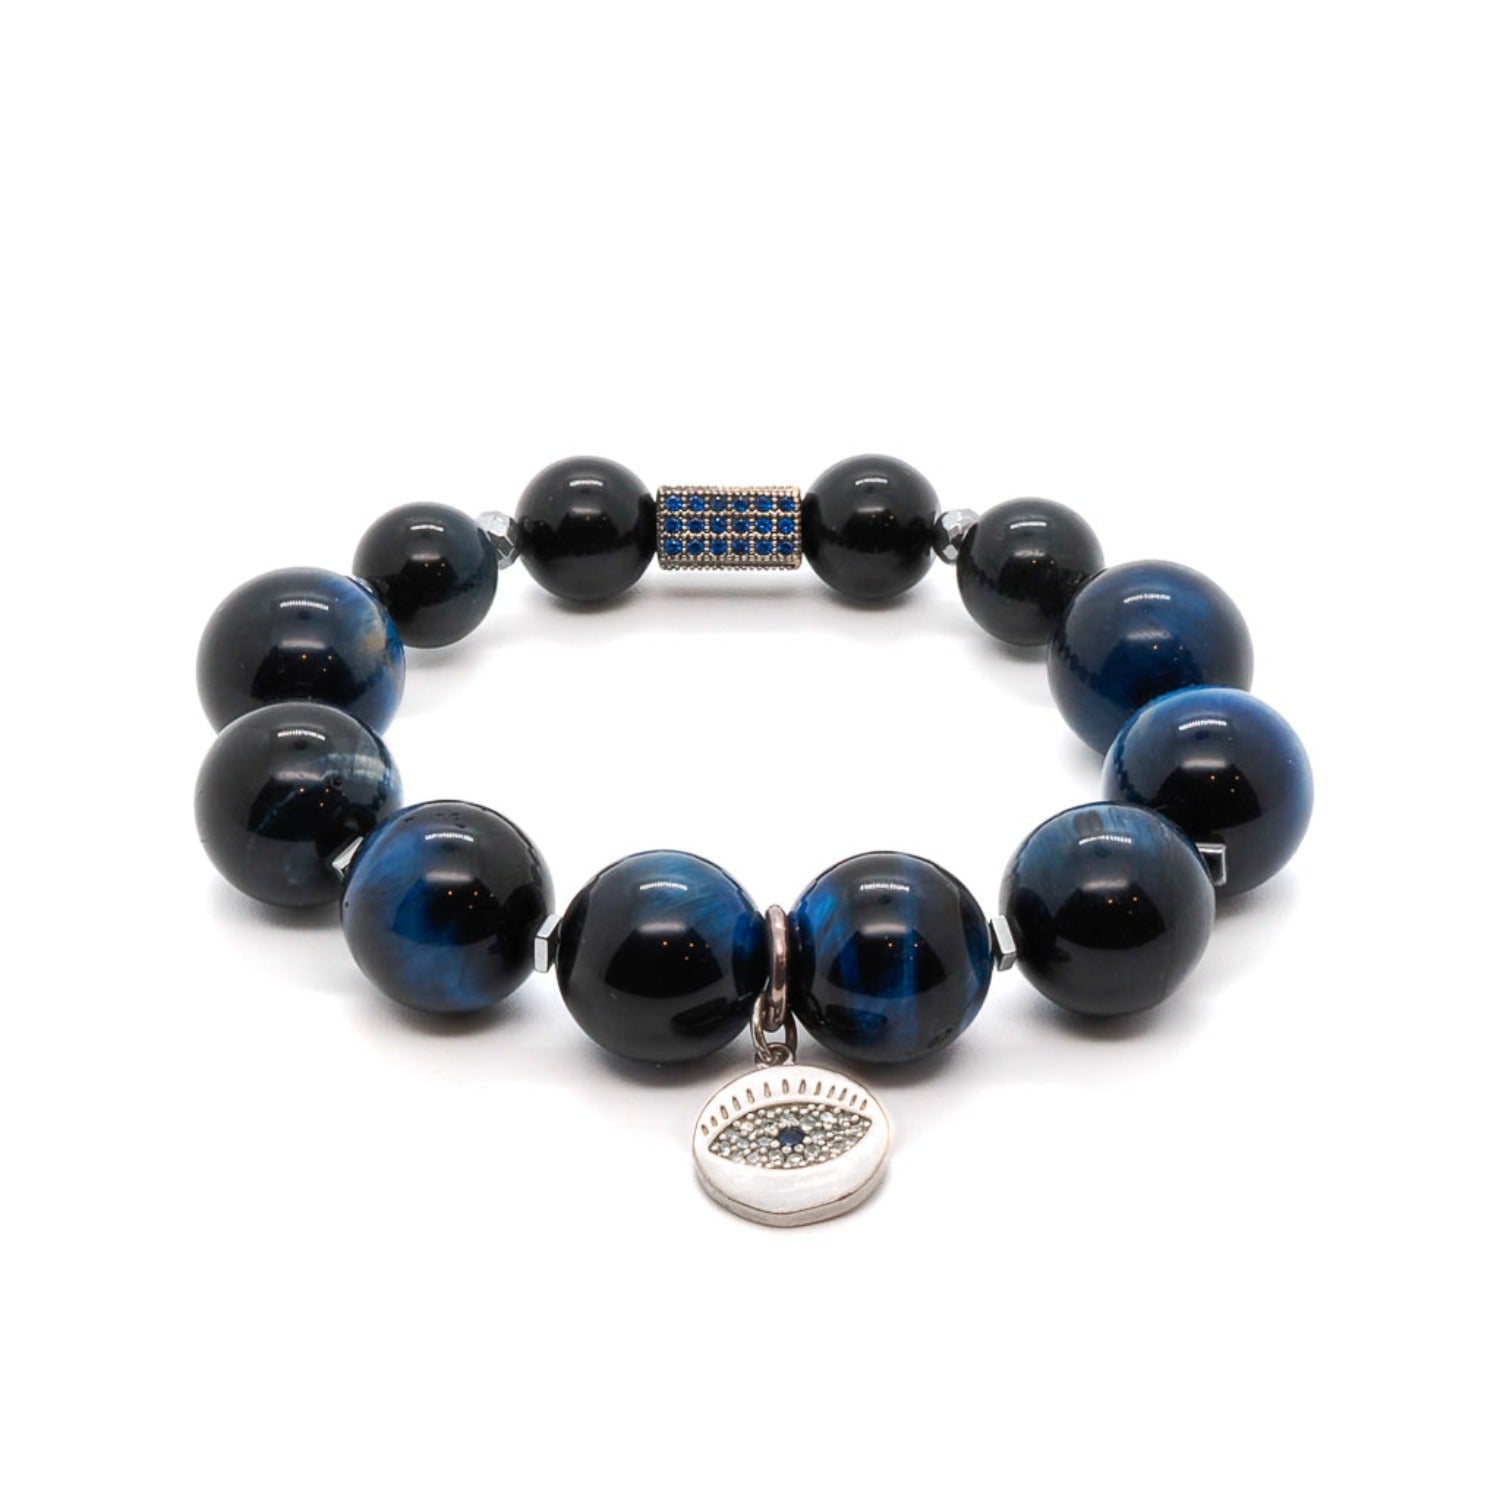 Embrace the strength and style of the Power Of Eye Bracelet, a stunning piece of handmade jewelry adorned with Blue Tiger's Eye stone beads.